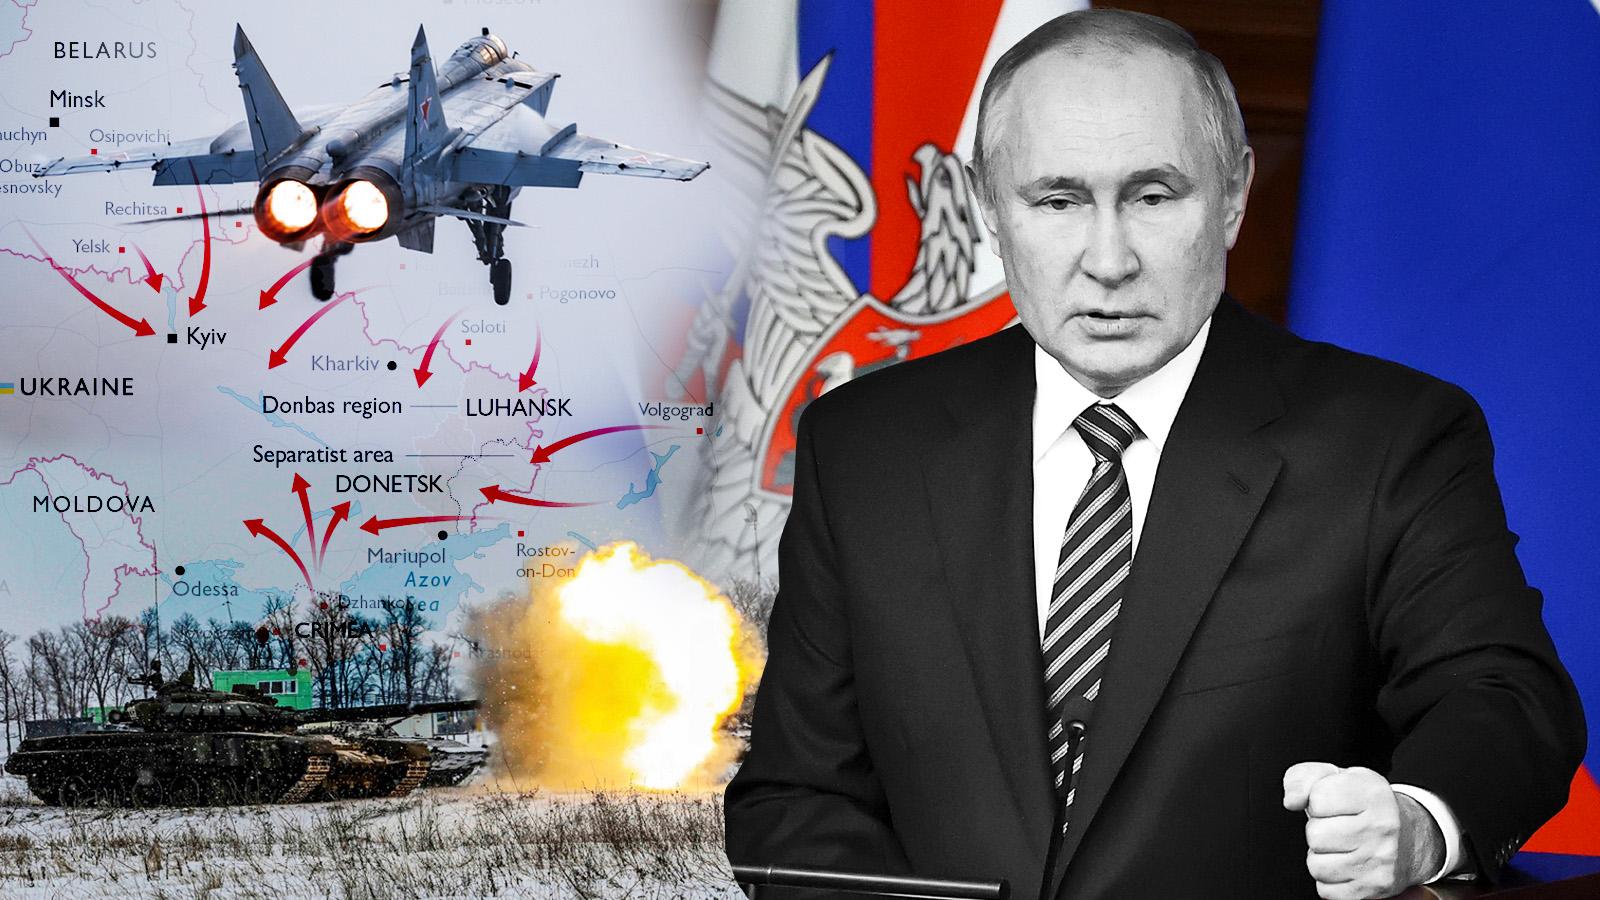 Russia Putin Ukraine conflict and wars 2022. Facts about the conflict in Ukraine in 2022/2023 by Russian Federation